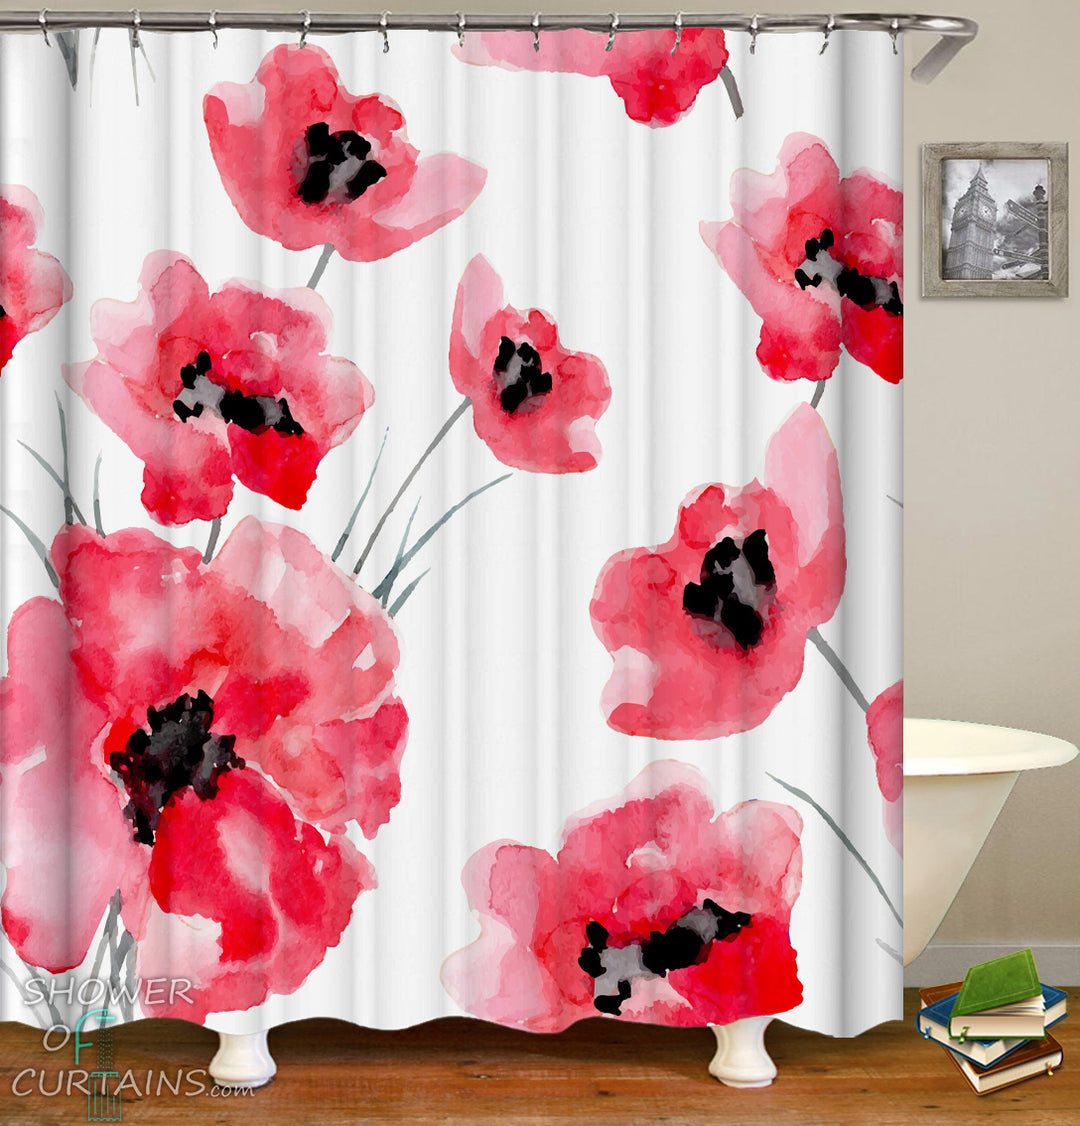 Red Shower Curtain - Red Flower Shower Curtains